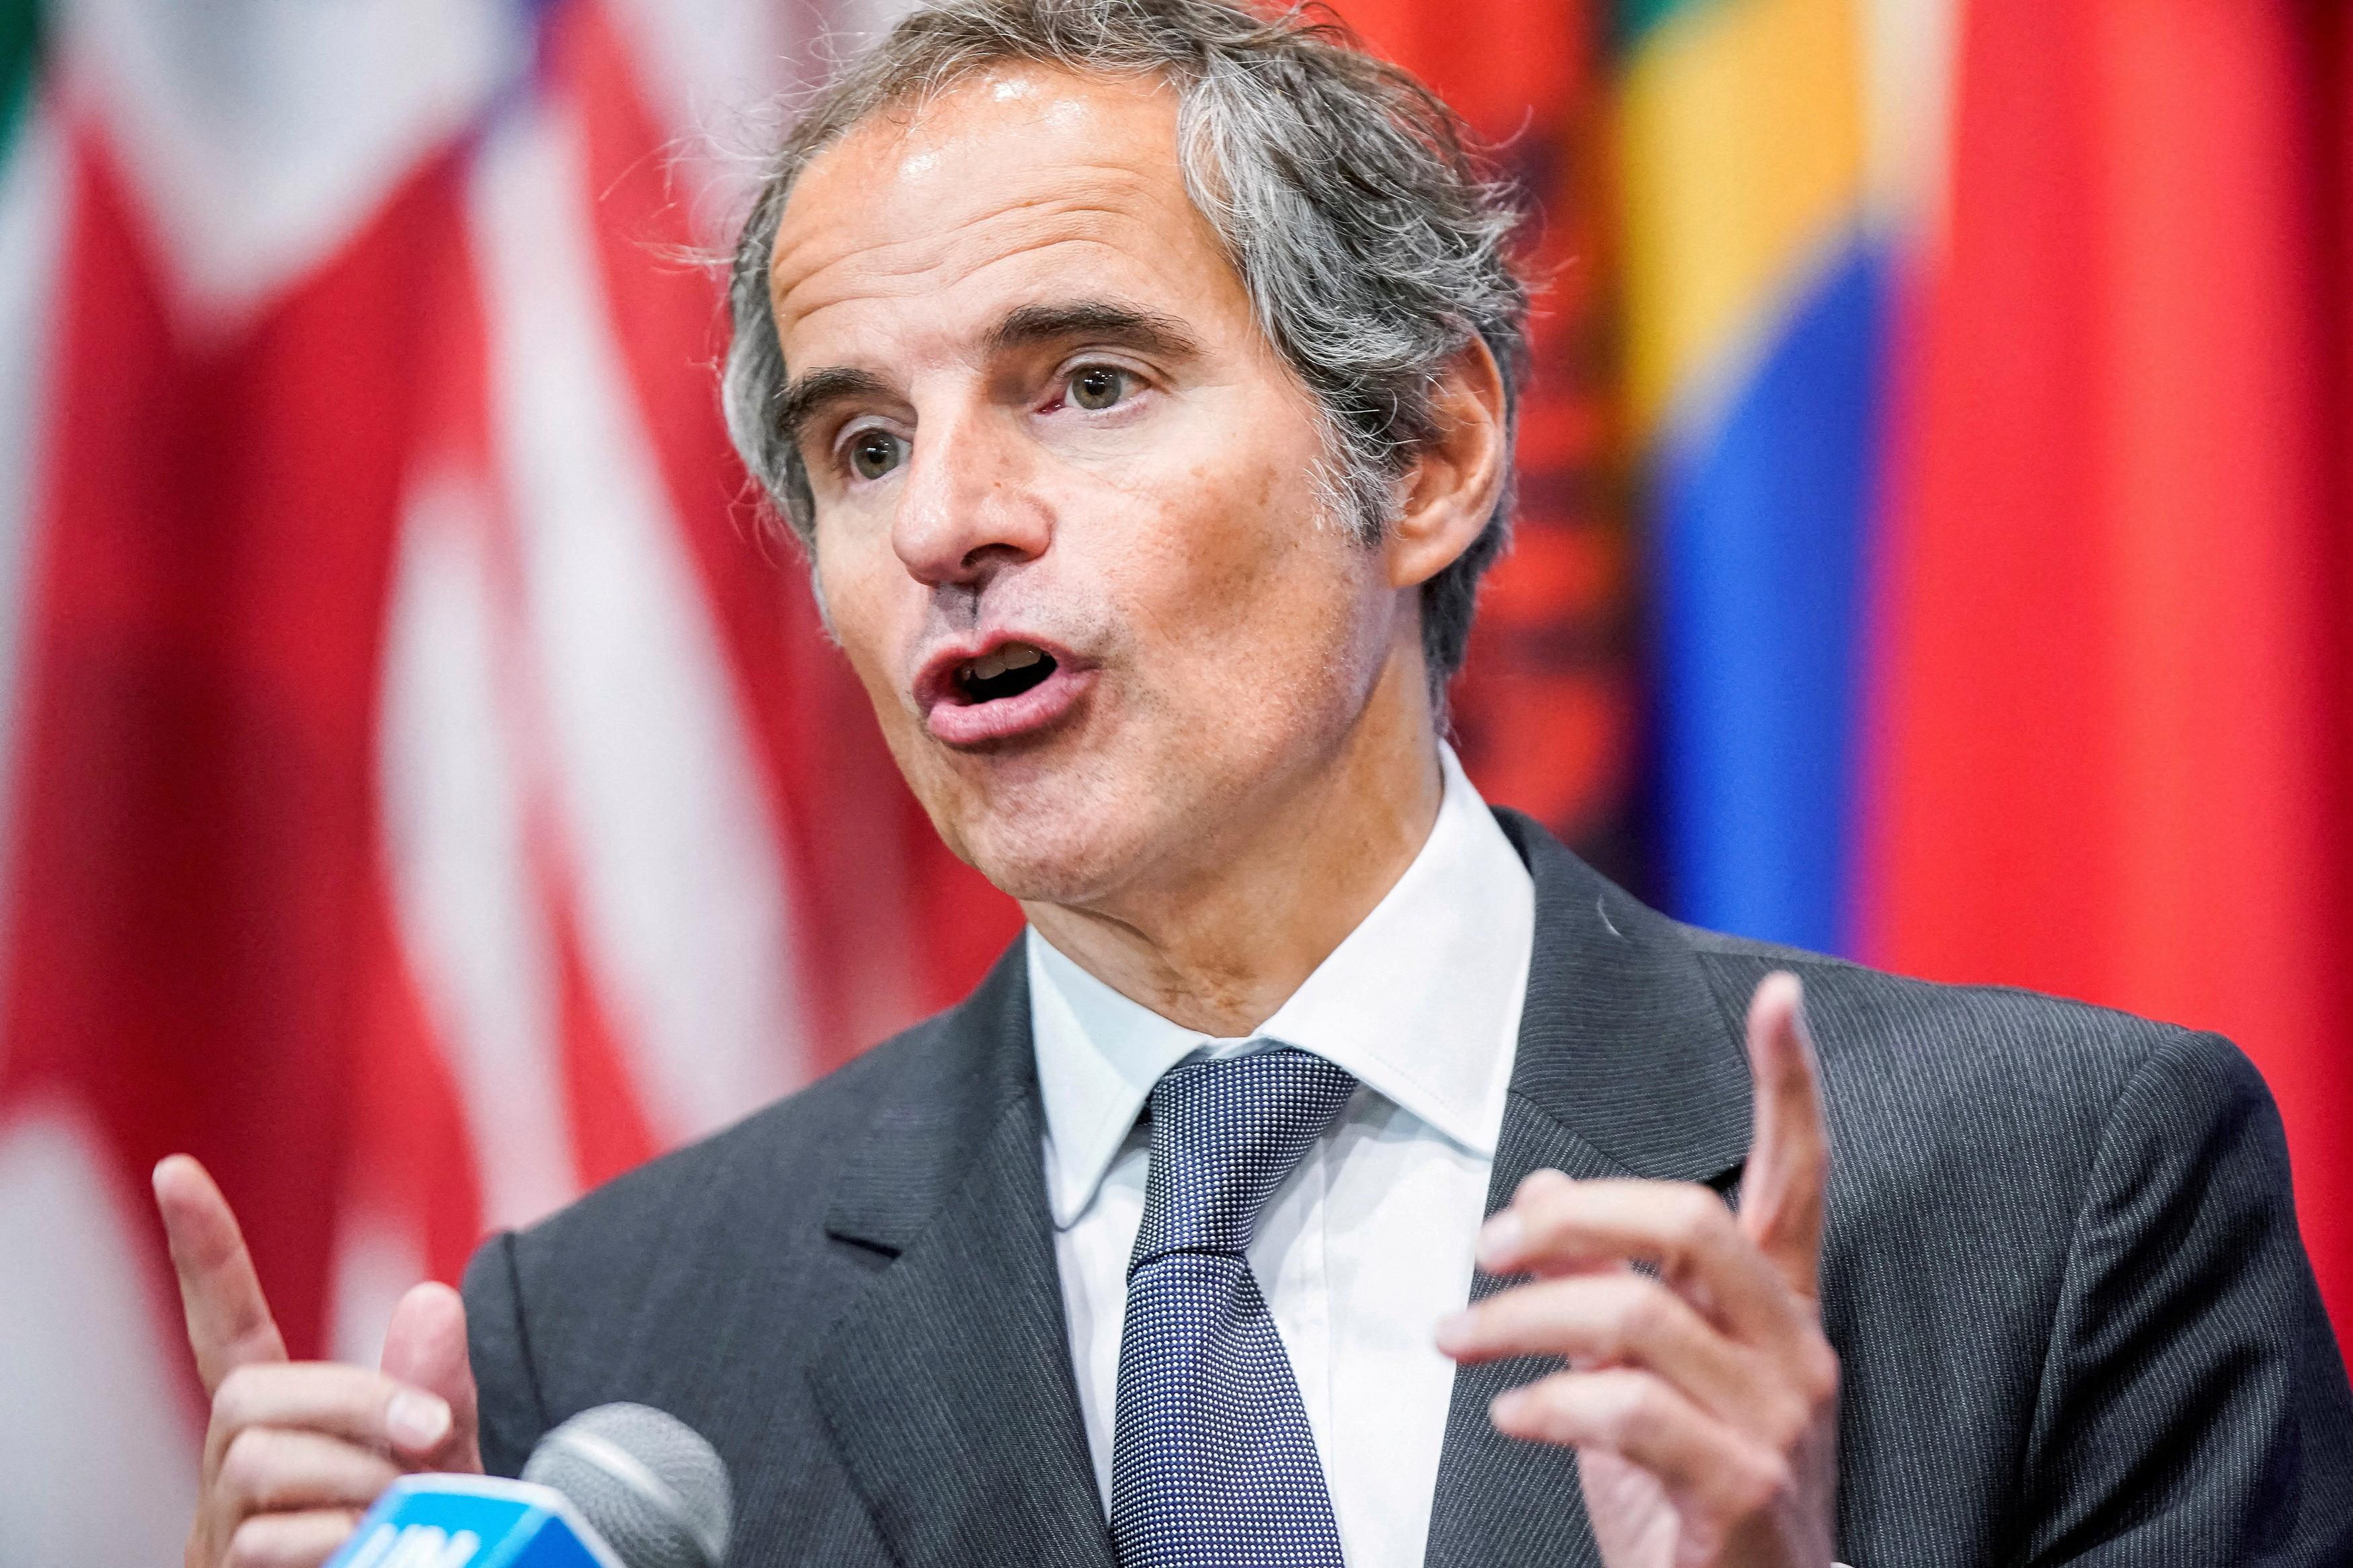 The Director General of the International Atomic Energy Agency (IAEA), Rafael Mariano Grossi speaks to the media at the United Nations headquarters in New York